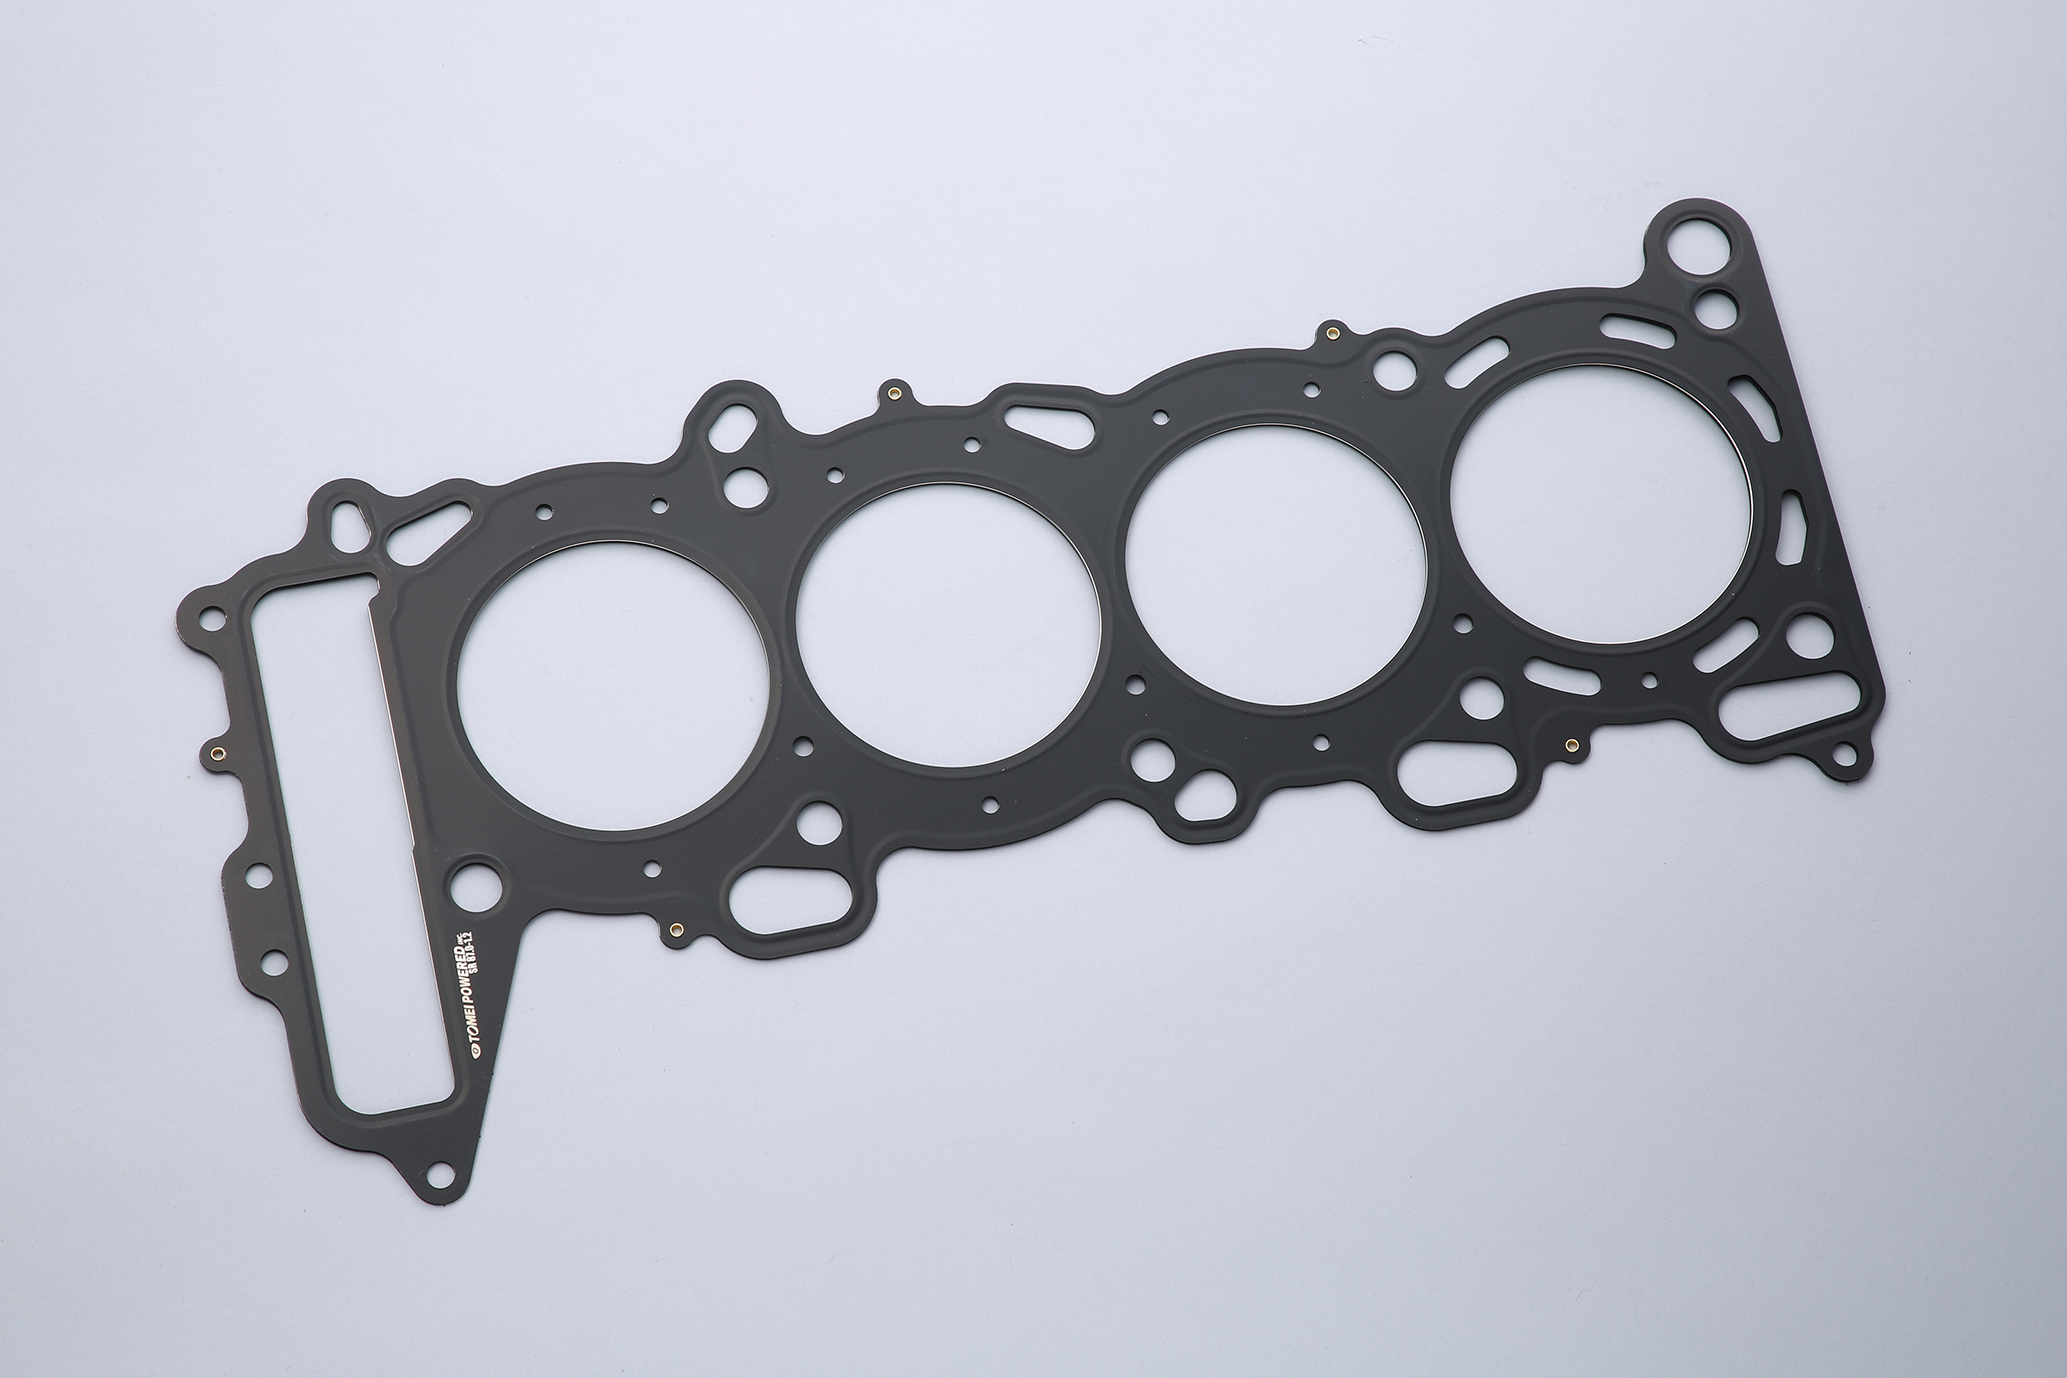 HEAD GASKET for SR20DET － TOMEI POWERED INC. ONLINE CATALOGUE